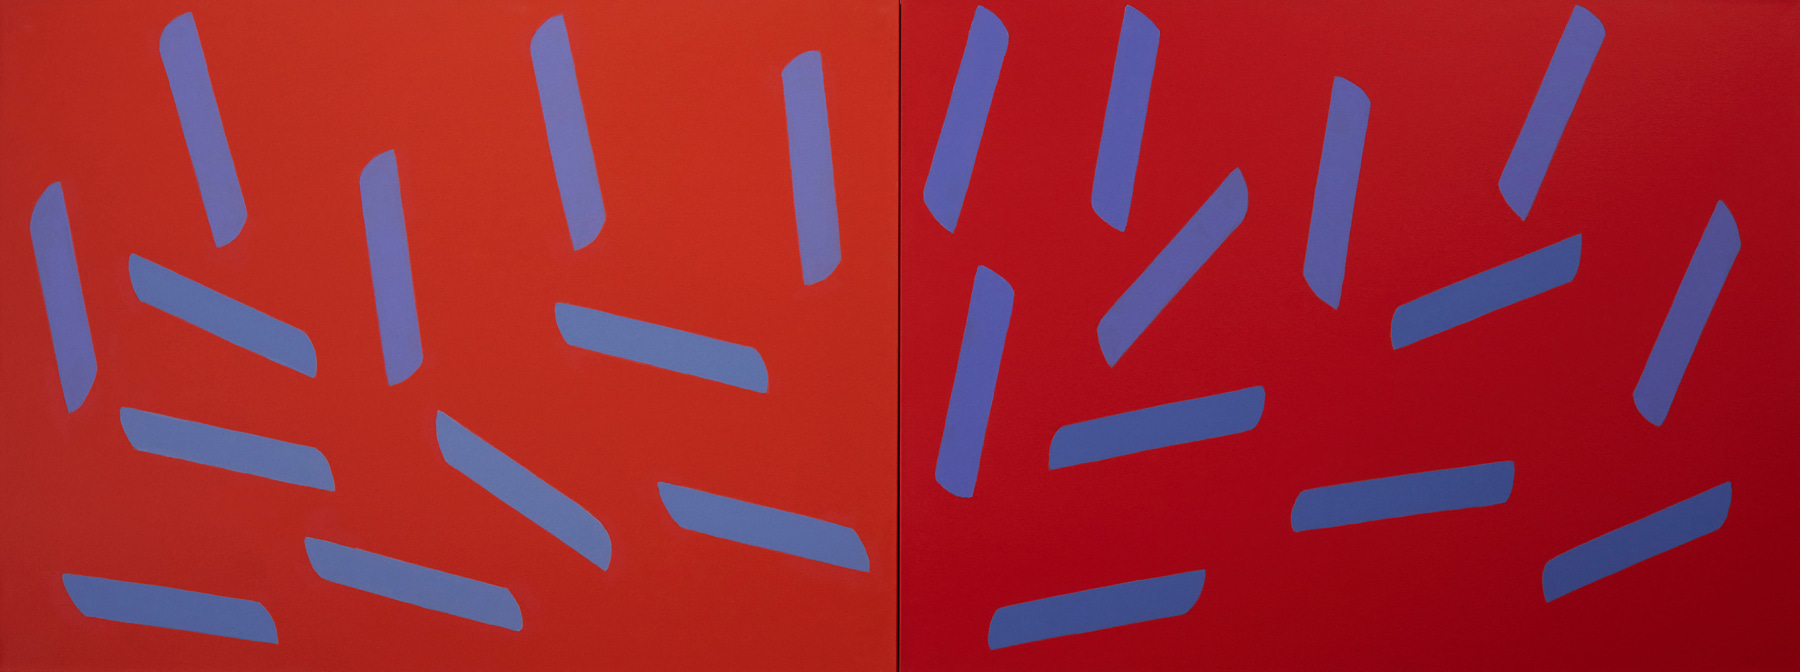 Untitled (Orange,Red), 2014
Acrylic on Canvas
36 x 96 inches